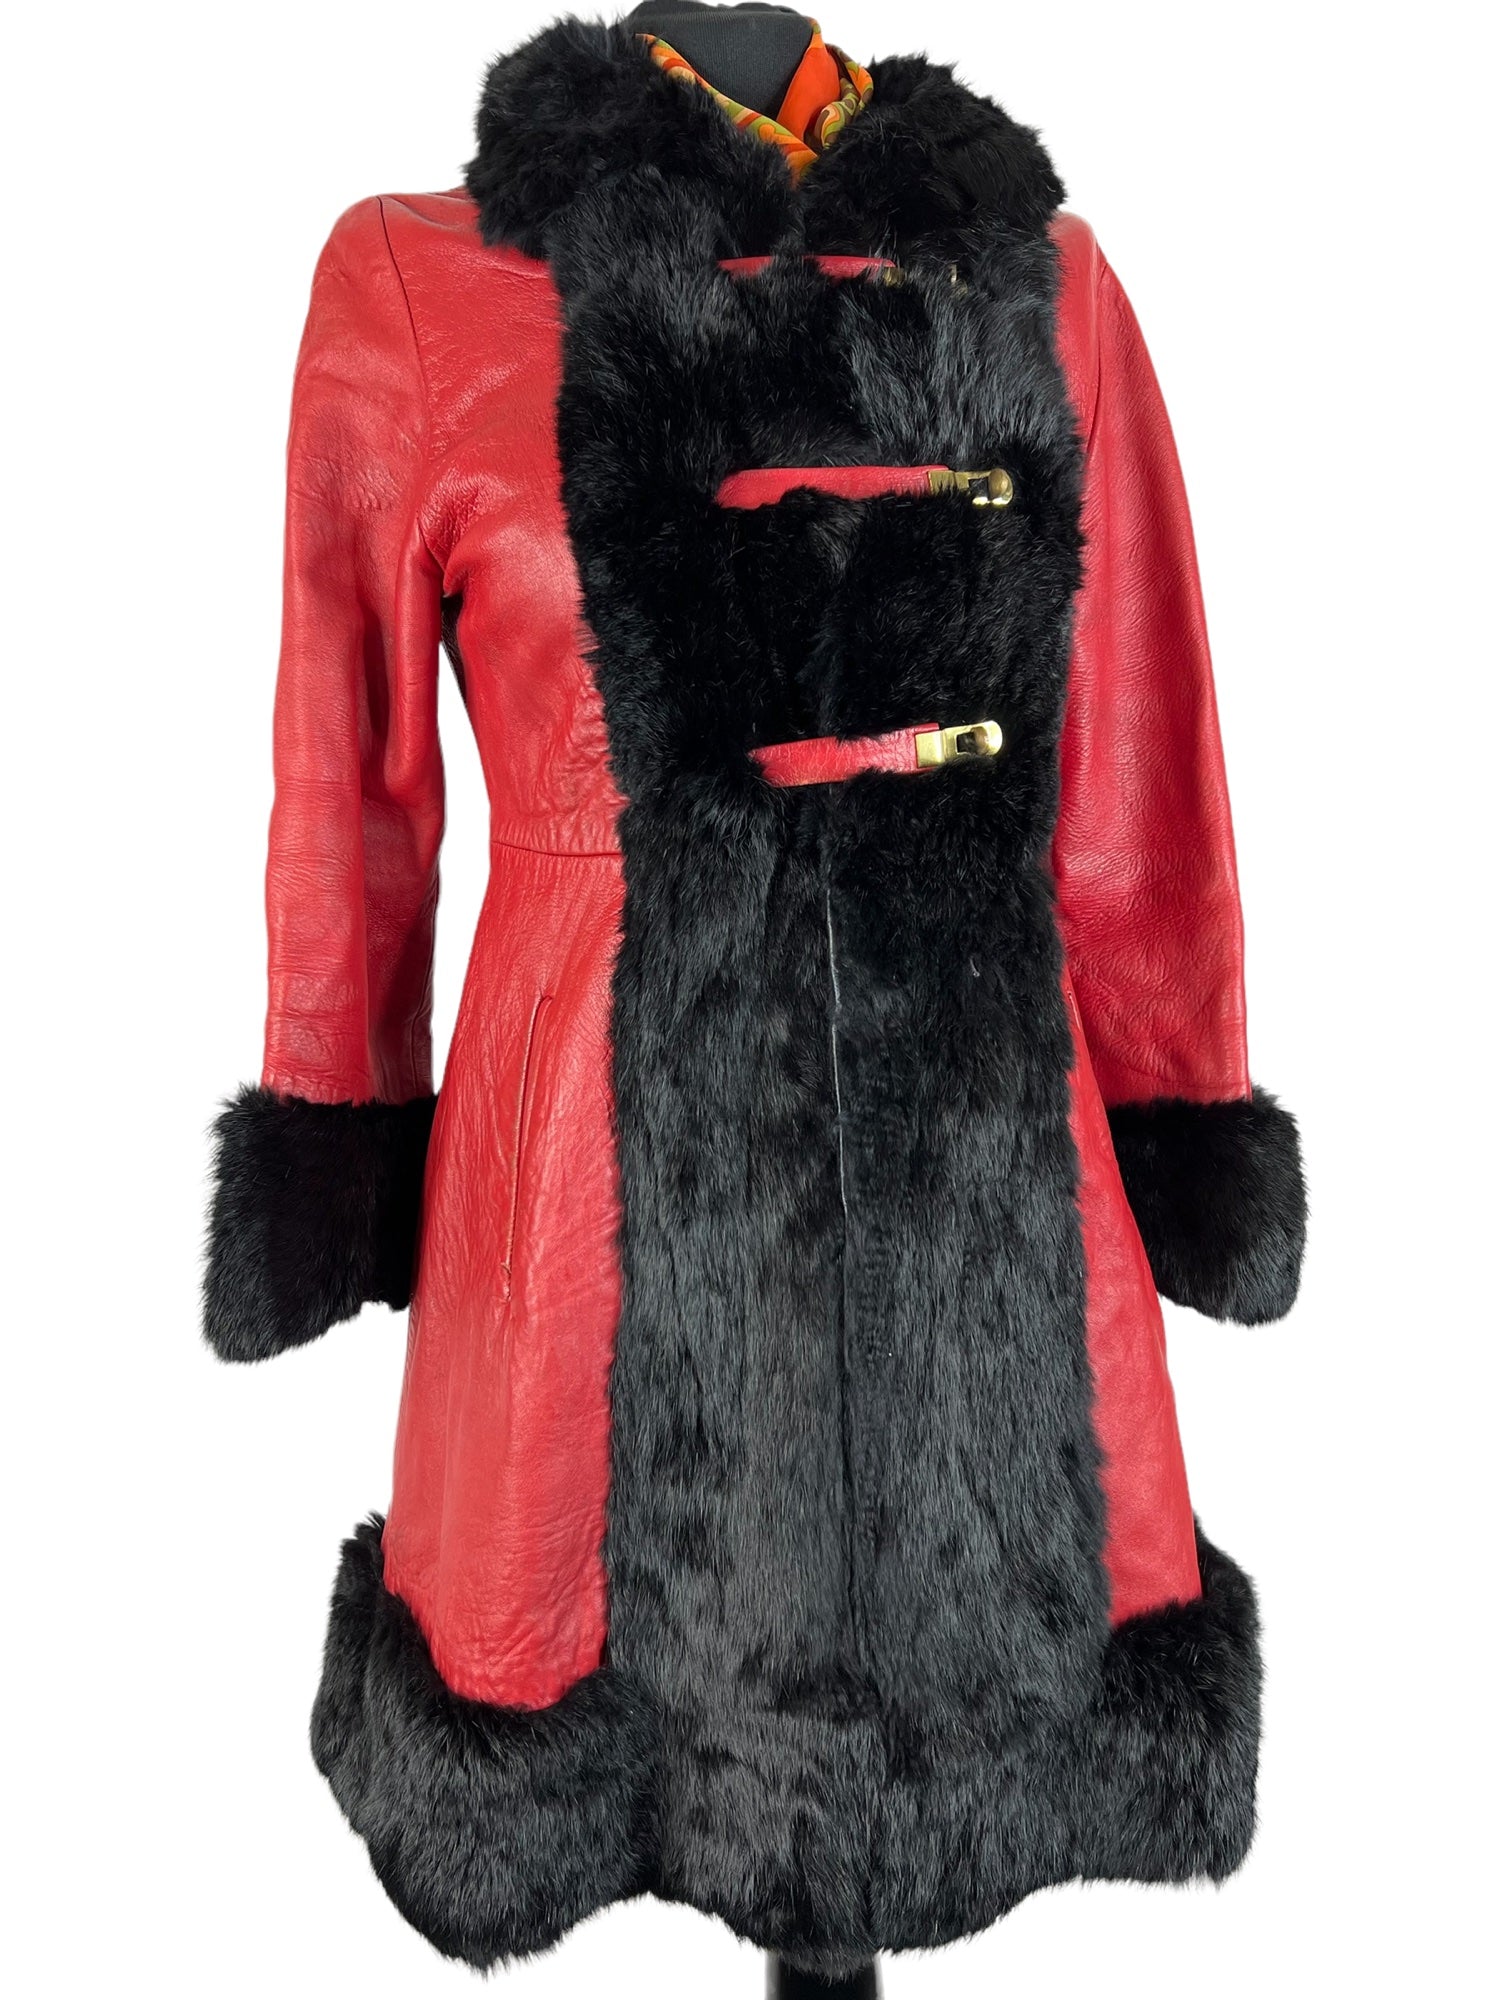 womens  winter warmer  Winter Coat  winter  vintage fur  vintage  UK  twist lock  style  red leather  red  real fur  long coat  Leather Coat  Leather  ladies  fur trims  festive  fashion  Coney Fur  coat  clothing  clothes  christmassy  christmas  black coney fur  autumnal  autumn  70s  1970s  10